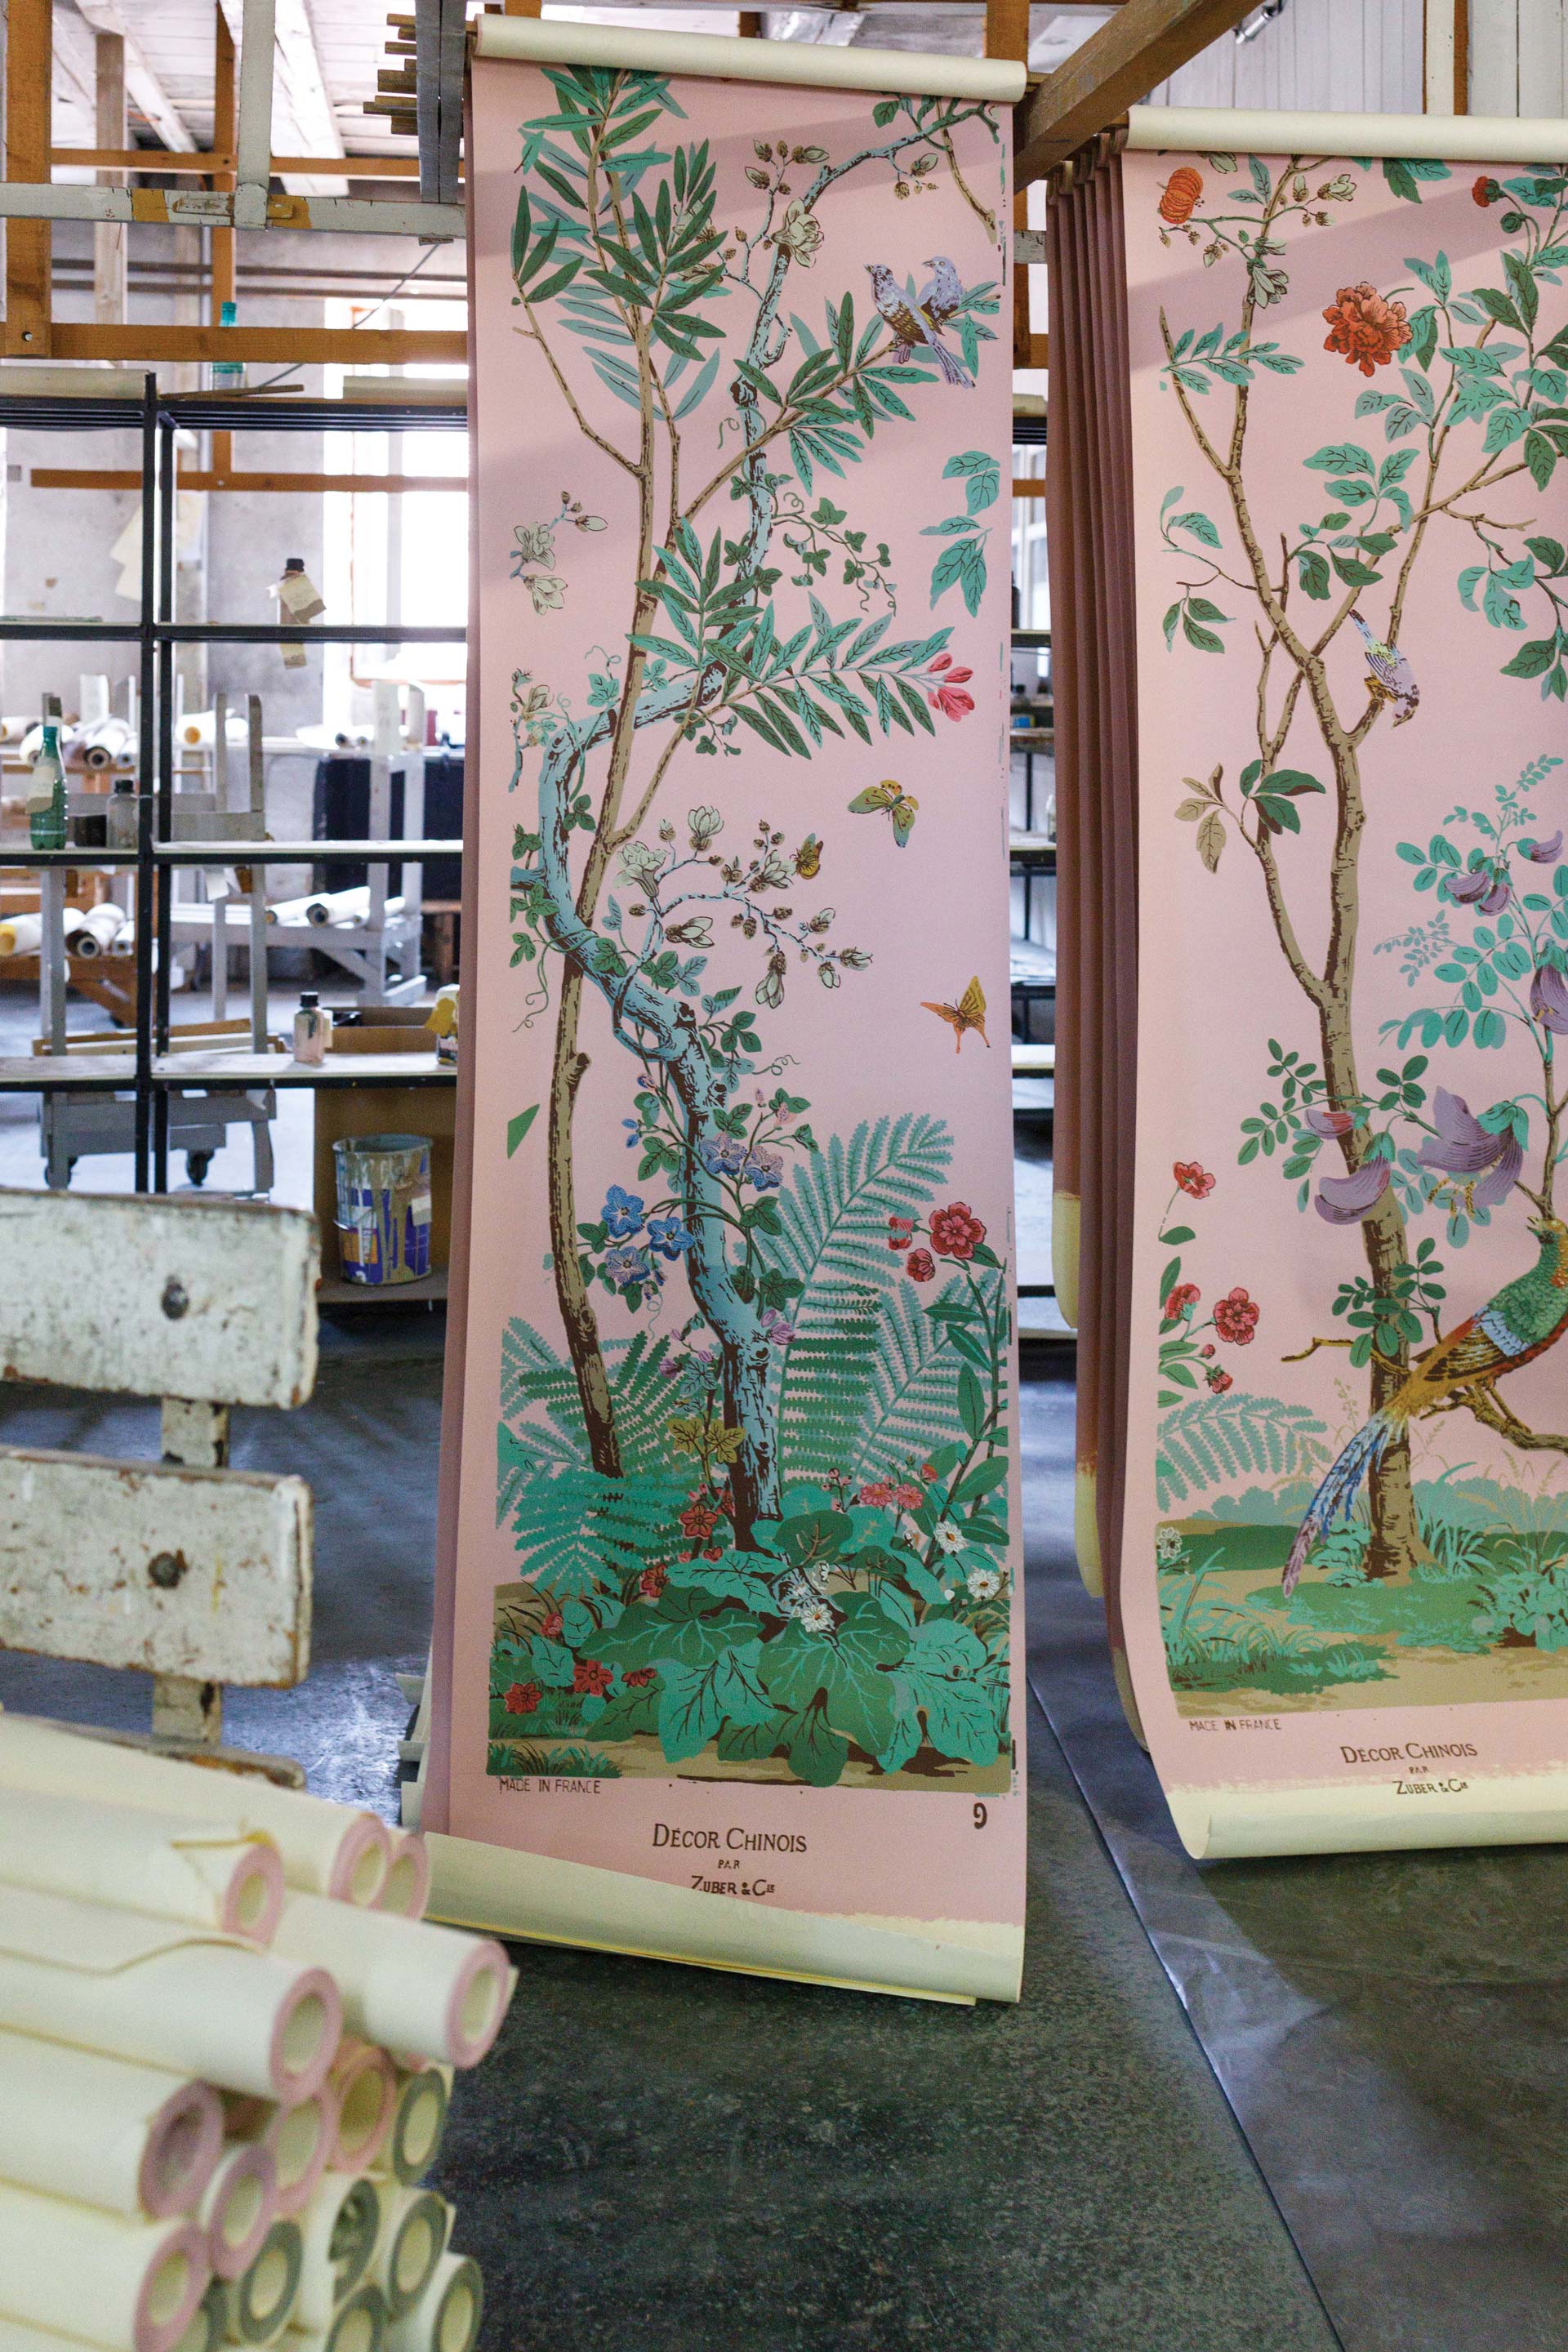 Panels of a panorama: Decor Chinois, a pattern originally created in 1832.